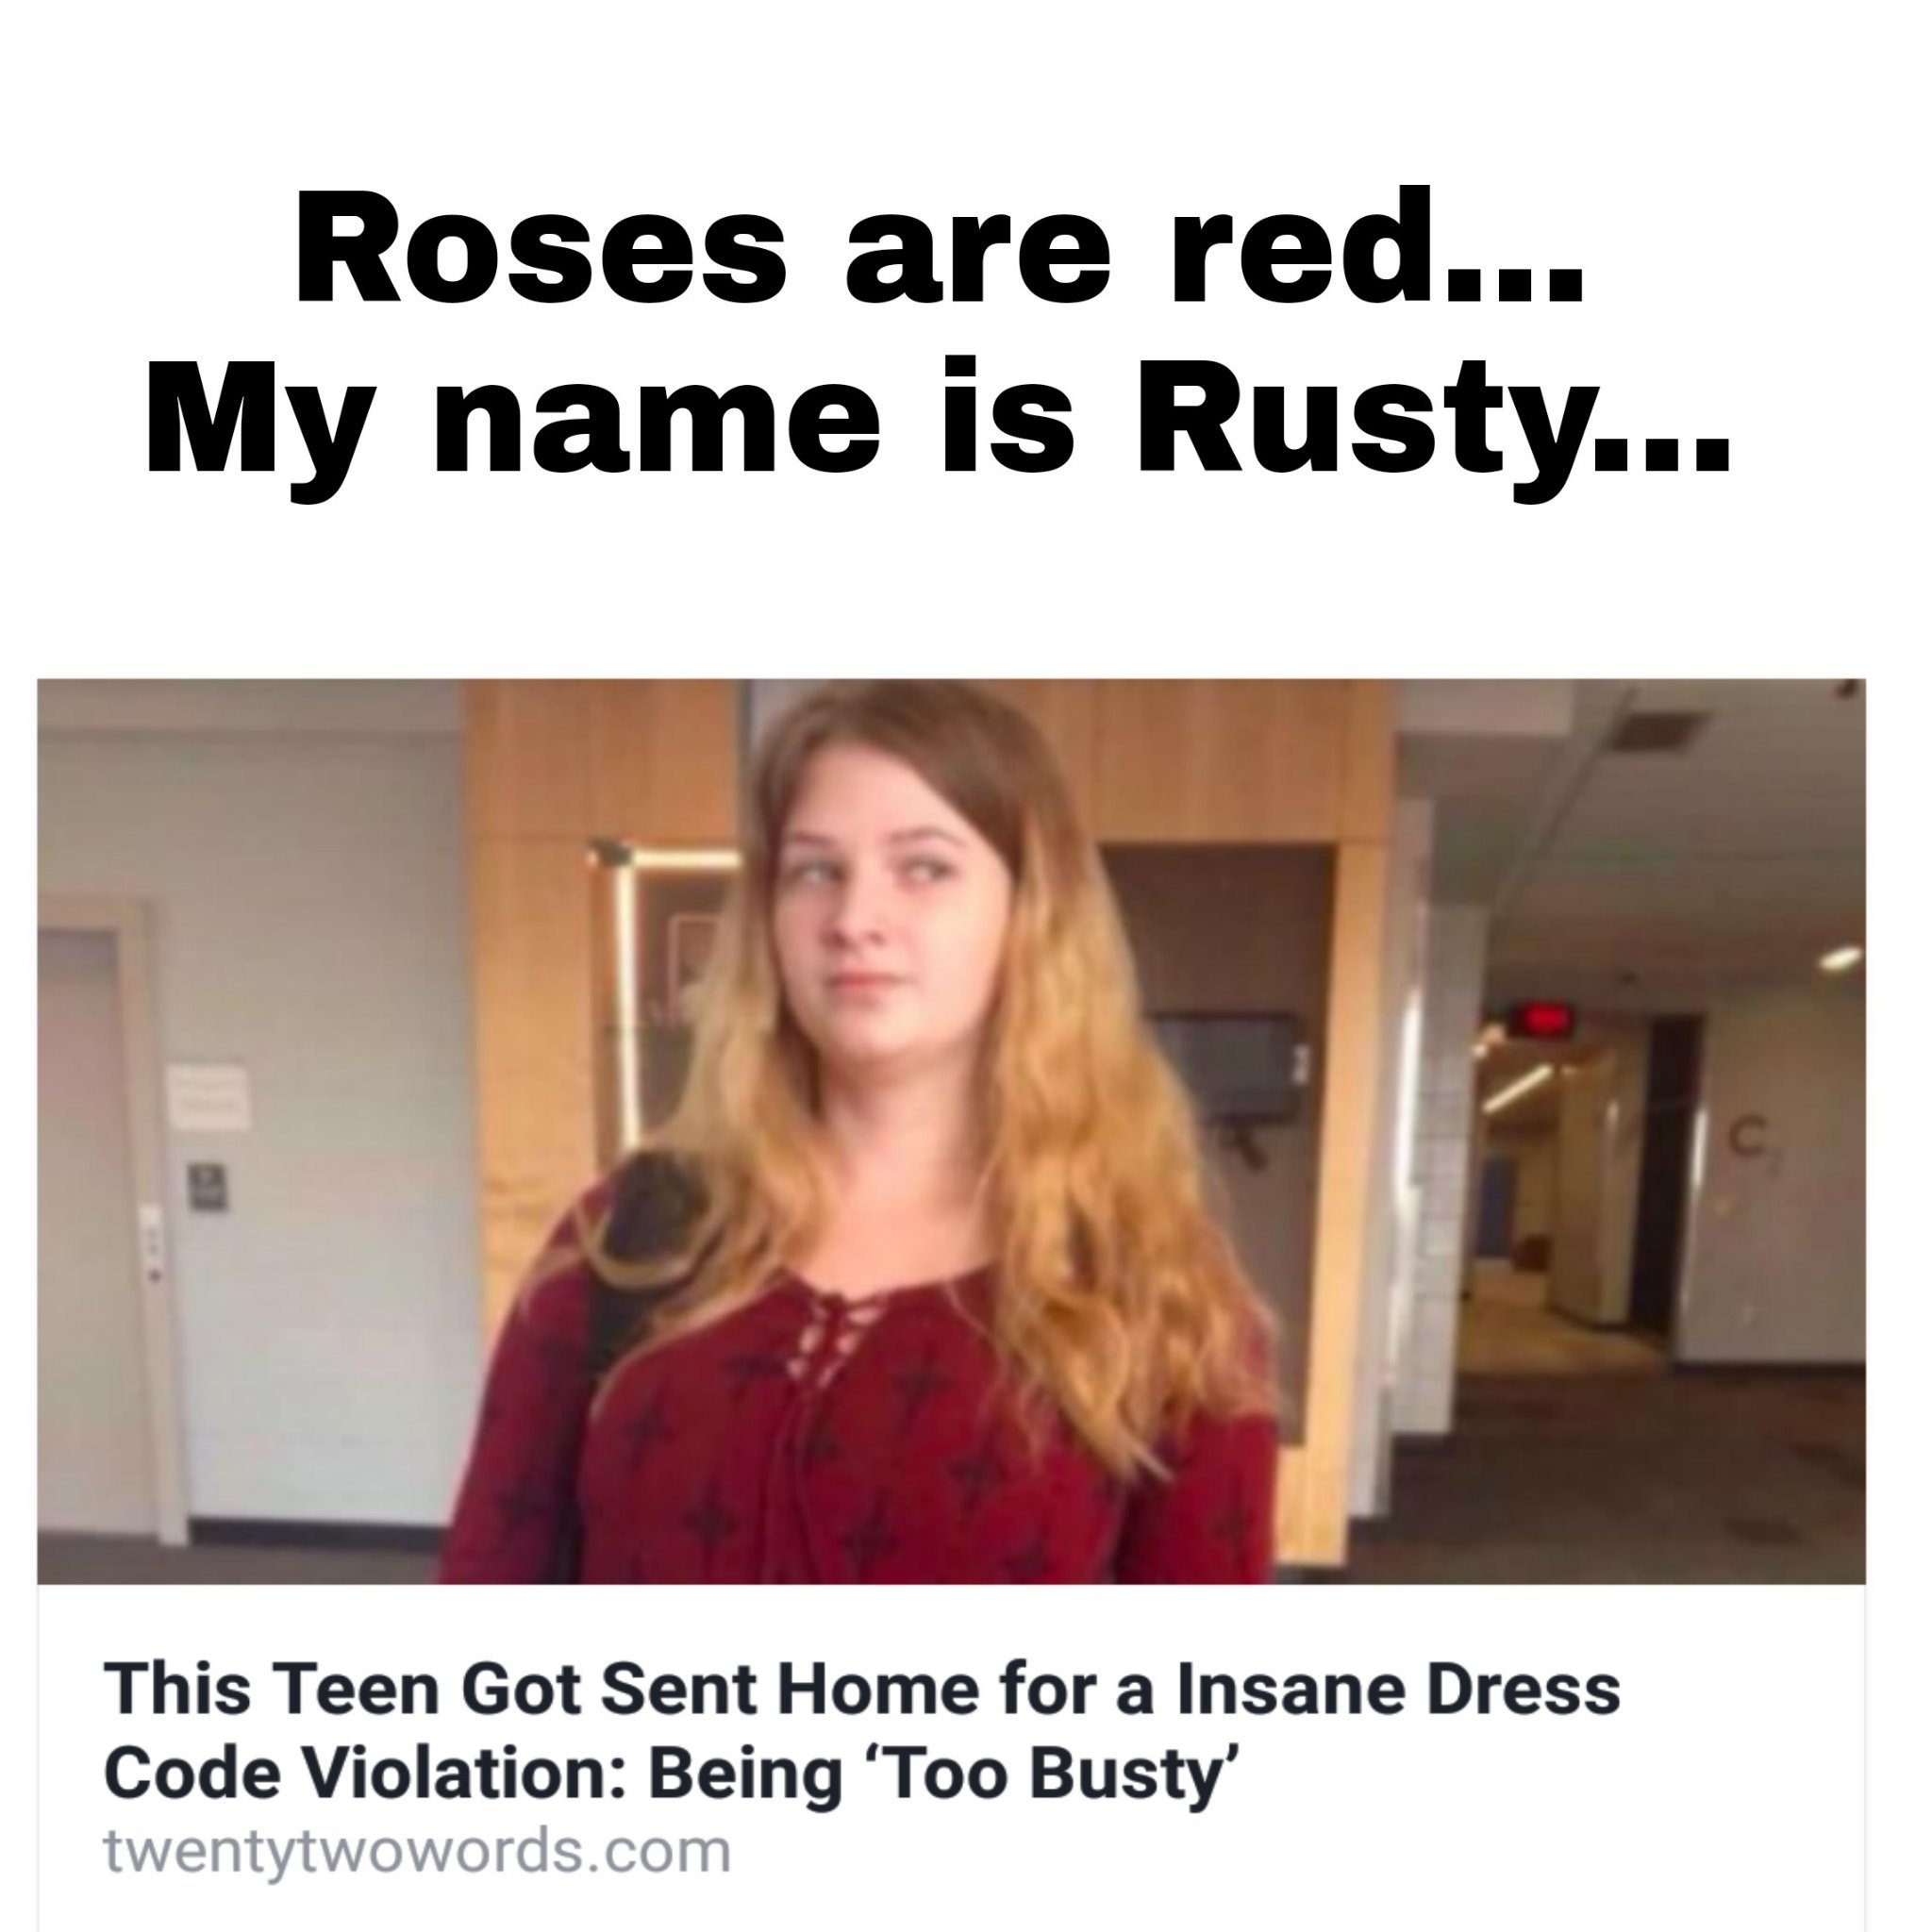 Another roses are red meme... - Meme by Jul52147 :) Memedroid